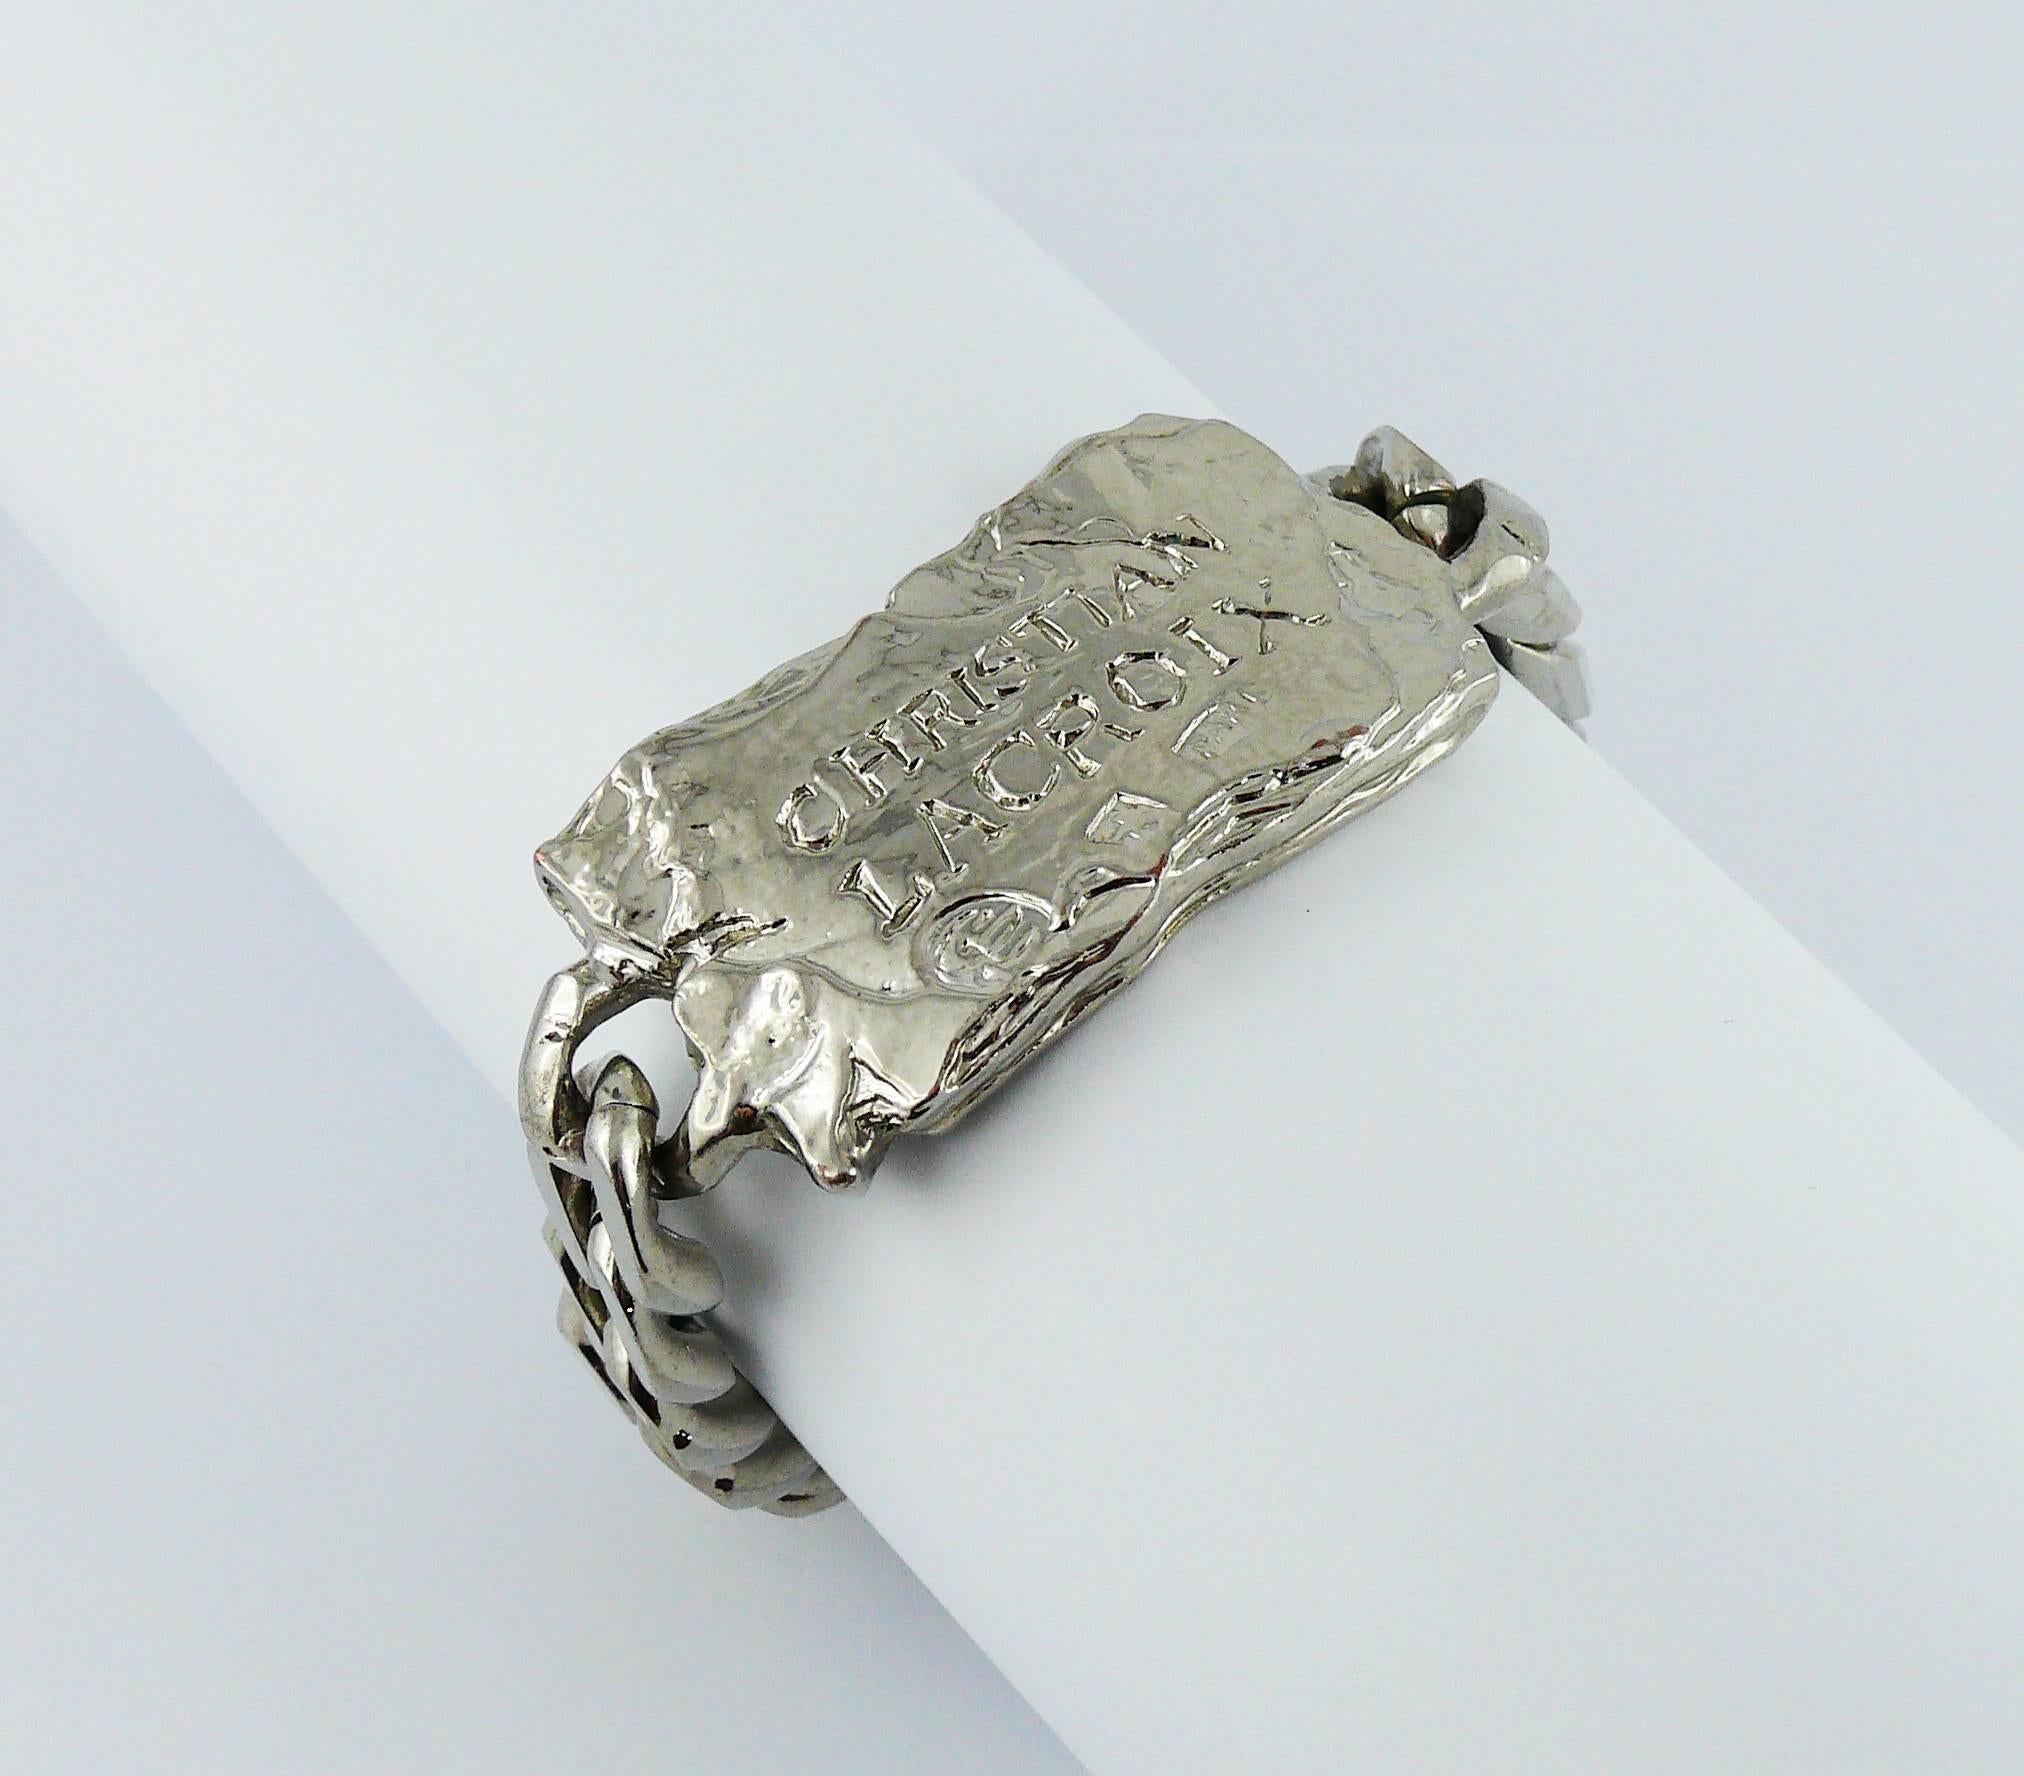 CHRISTIAN LACROIX vintage rare silver tone ID tag curb bracelet.

This bracelet features :
- Massive curb chain links
- Textured ID tag plate embossed CHRISTIAN LACROIX Paris
- Secure clasp

Marked CHRISTIAN LACROIX CL Made in France.

Indicative